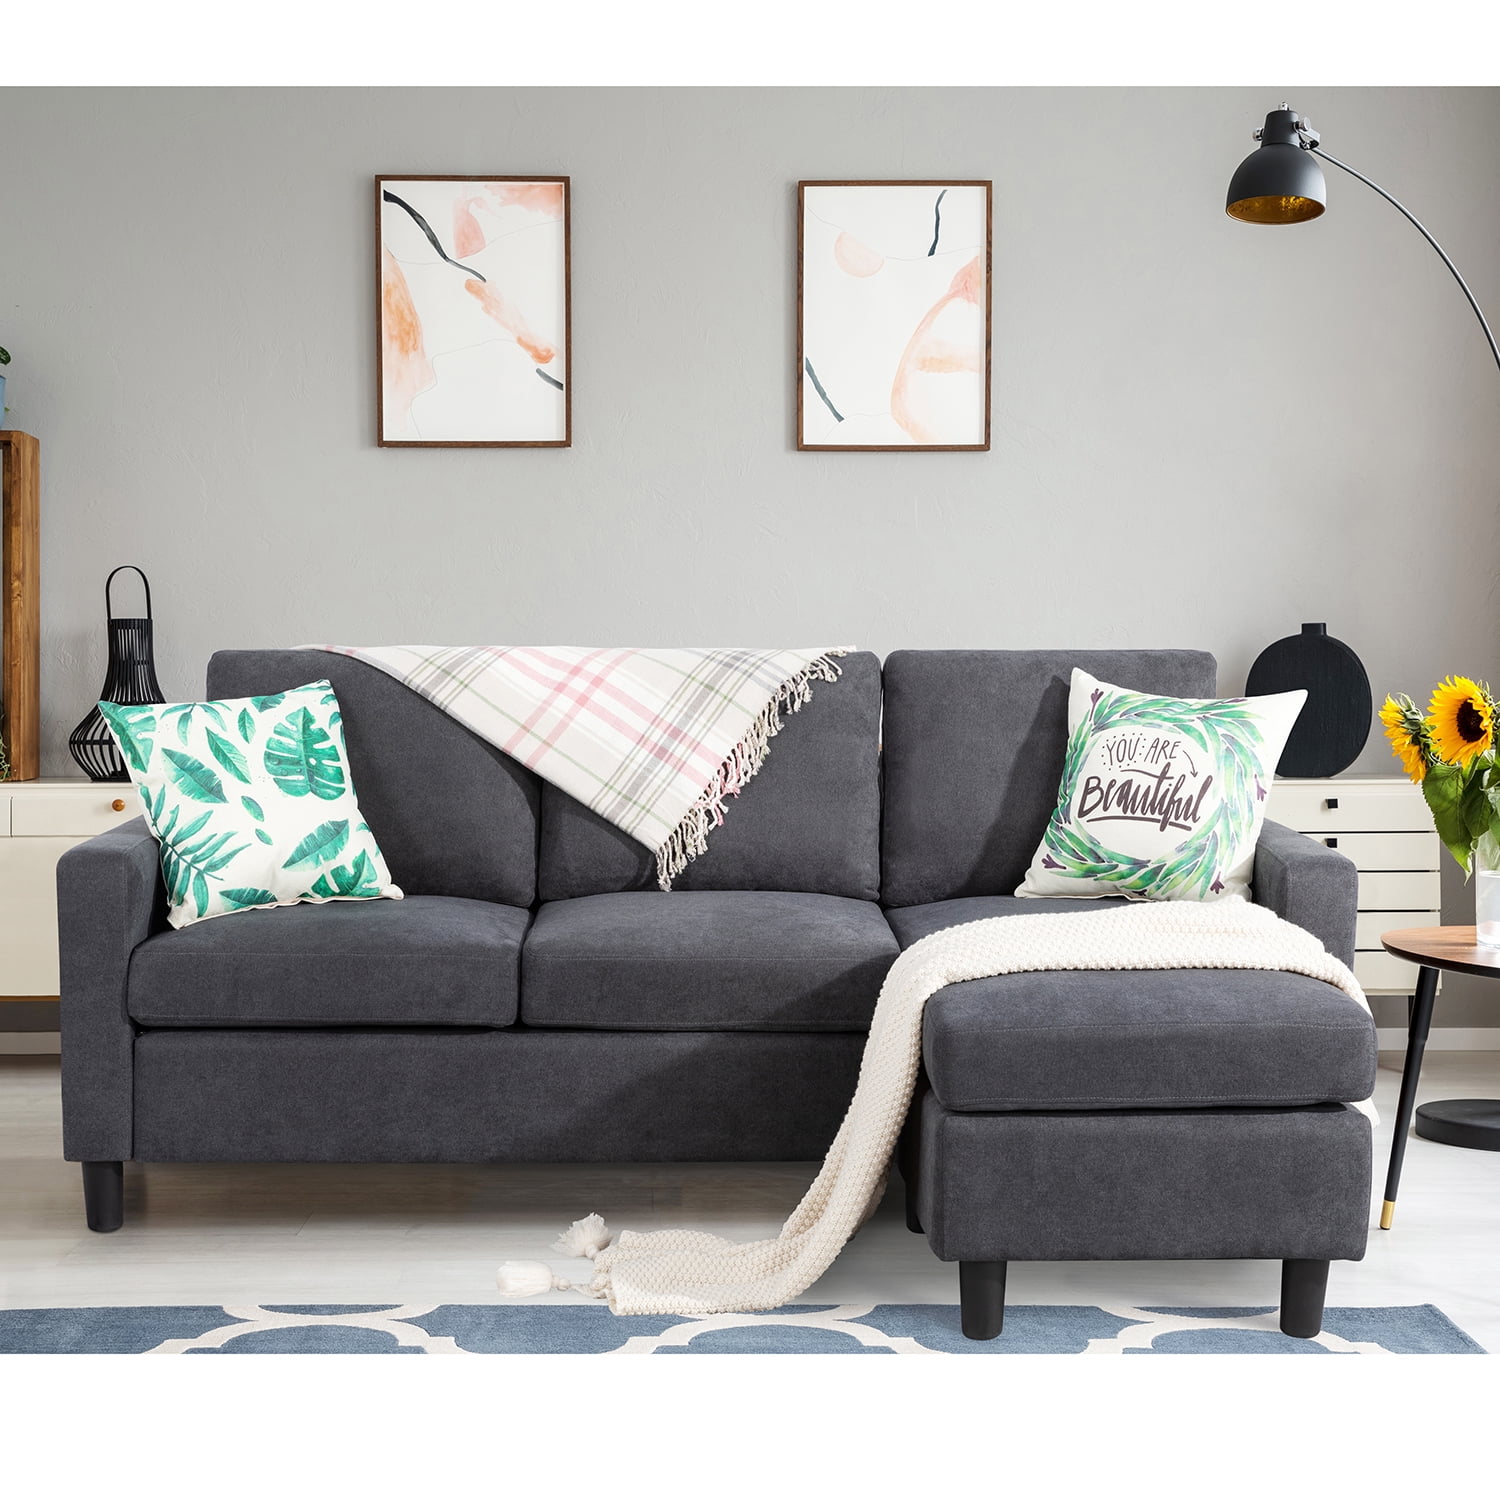 Grey, 2 Seater Panana 2 Seater Sofa Linen Fabric Modern Sofa Settee Couch for Living Room Home Furniture In Choice of 3 Stylish Colours